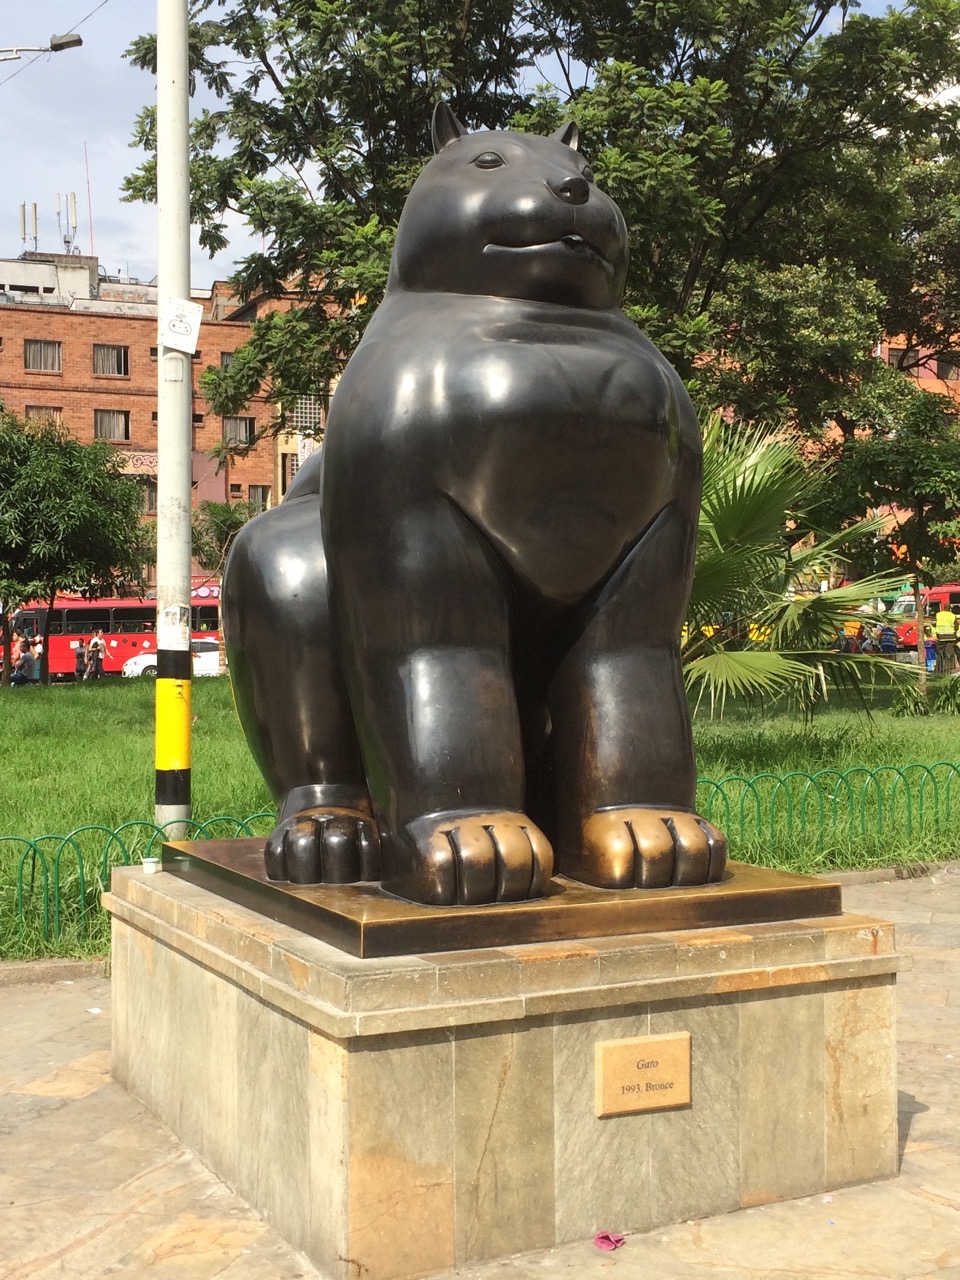 Like all his creations, Botero's cat is remarkably impressive